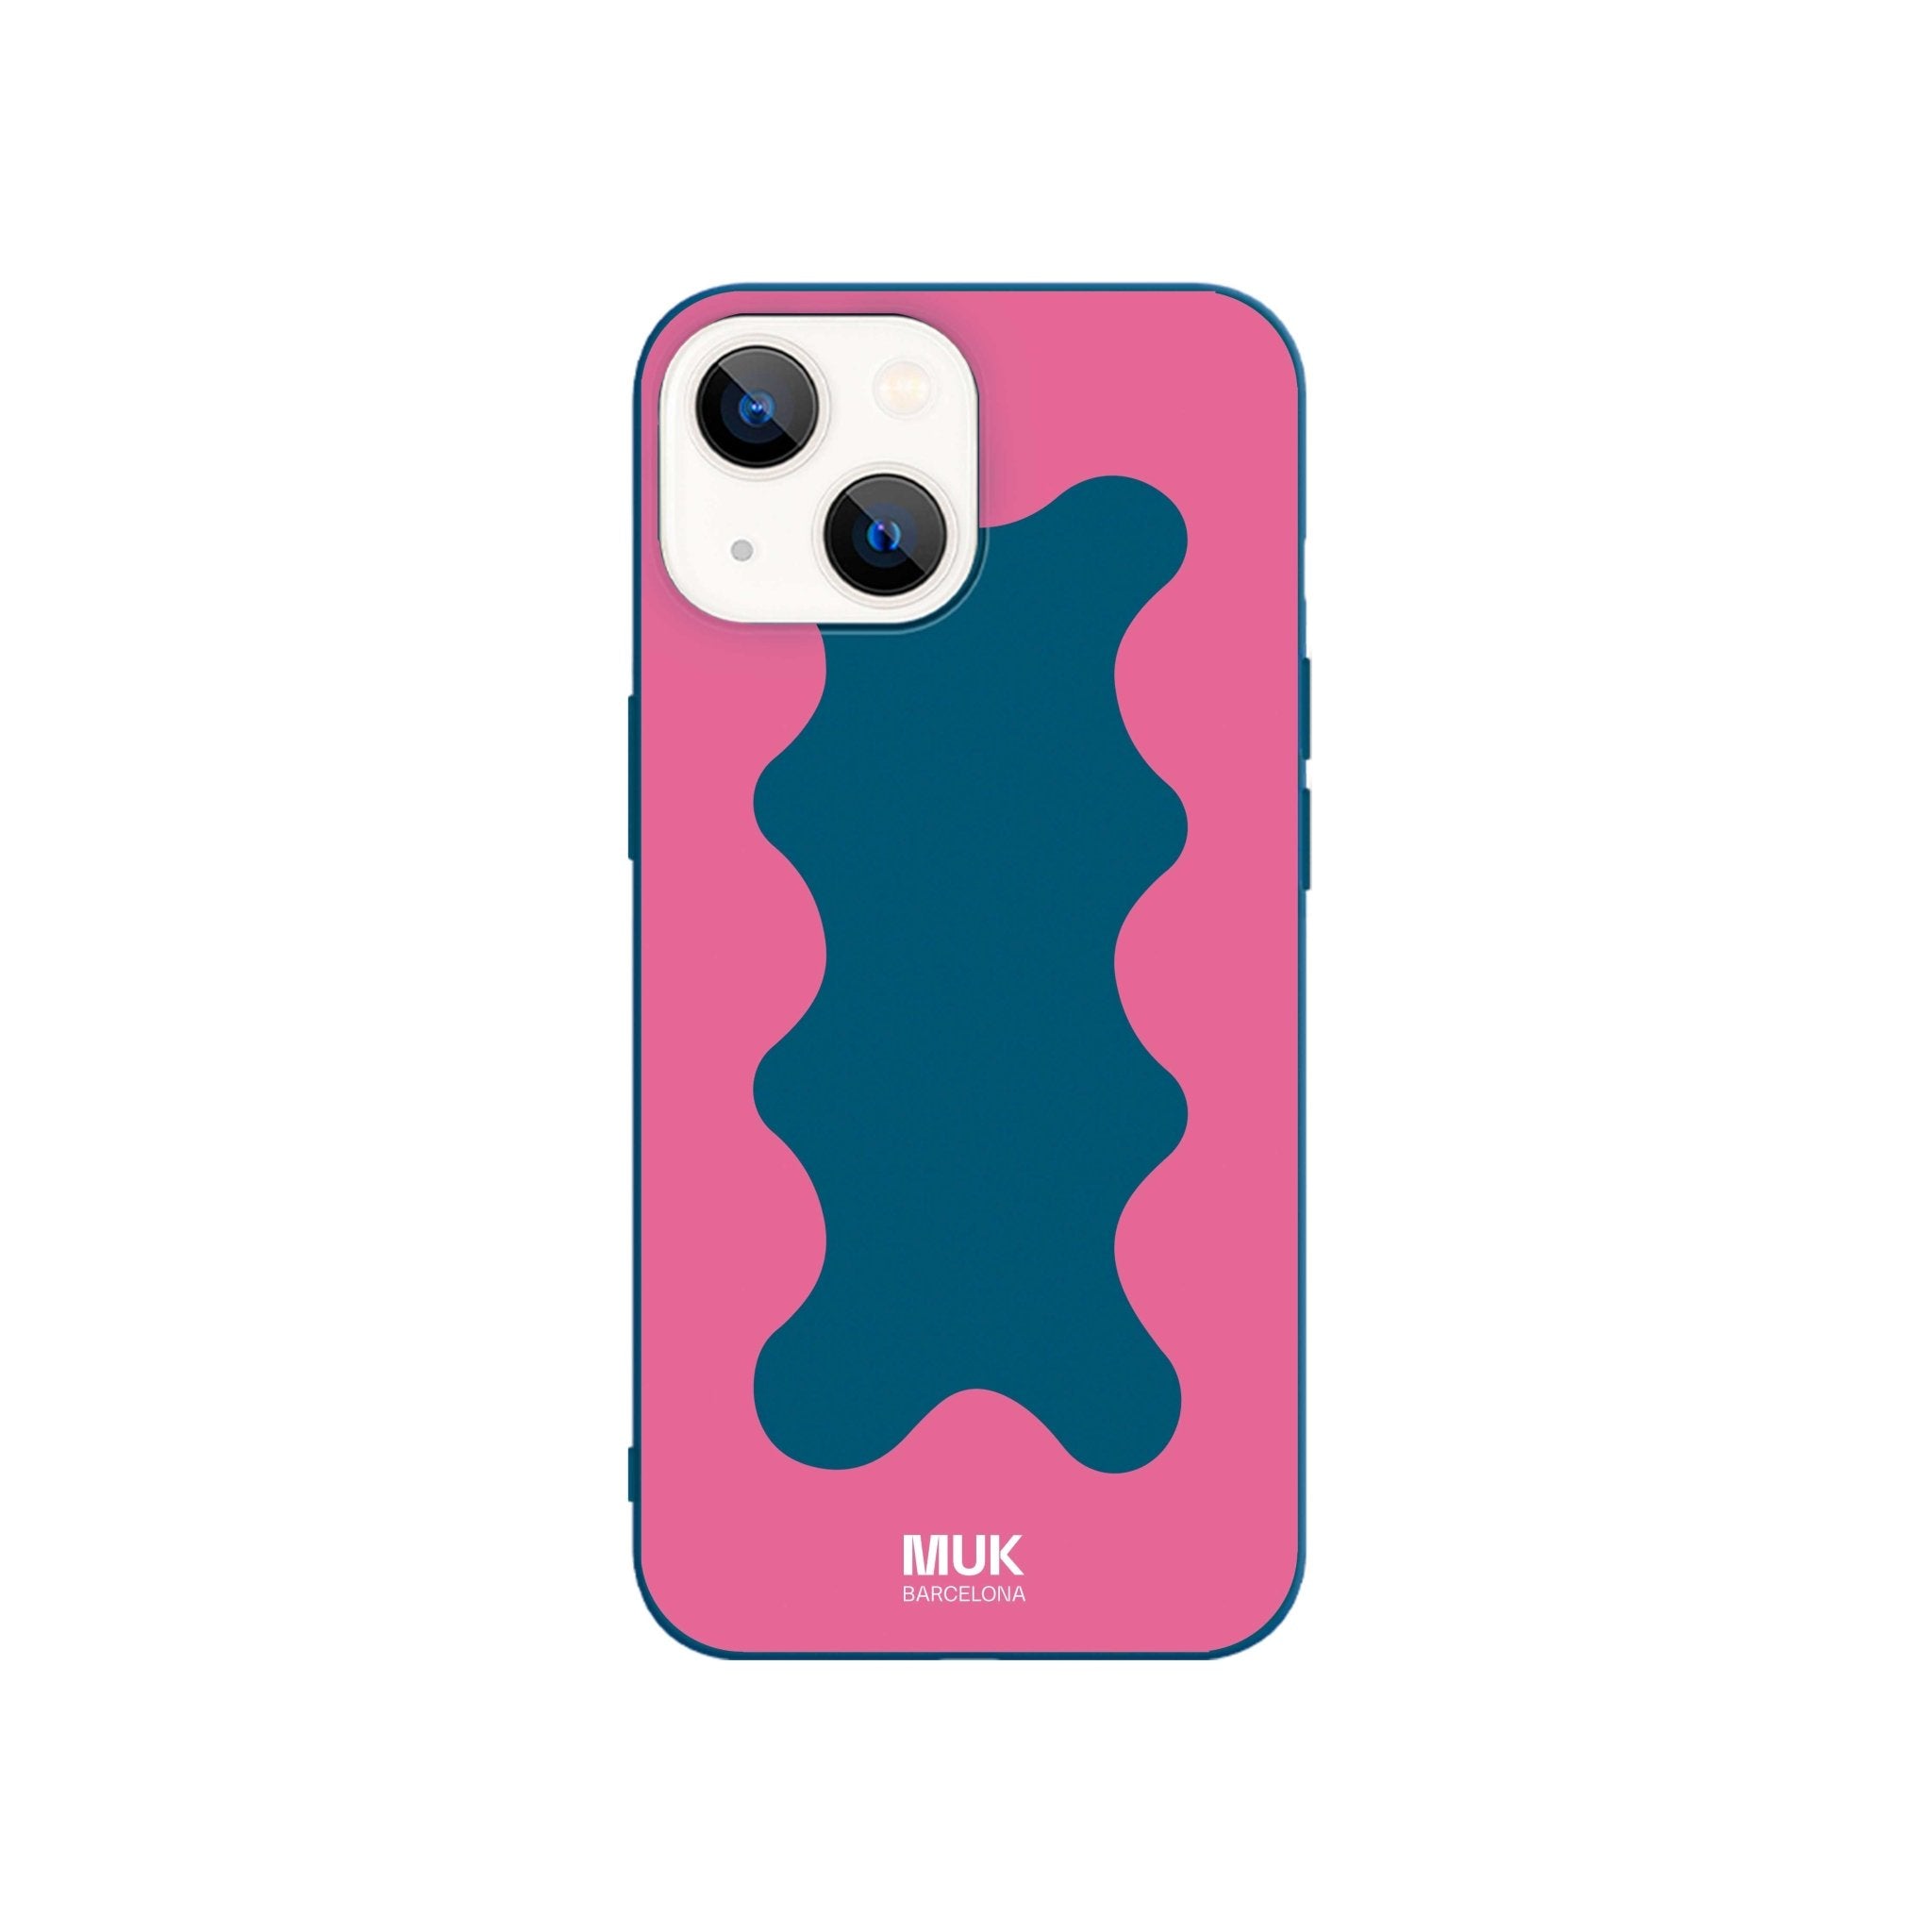 Blue TPU phone case with pink wavy frame design.
